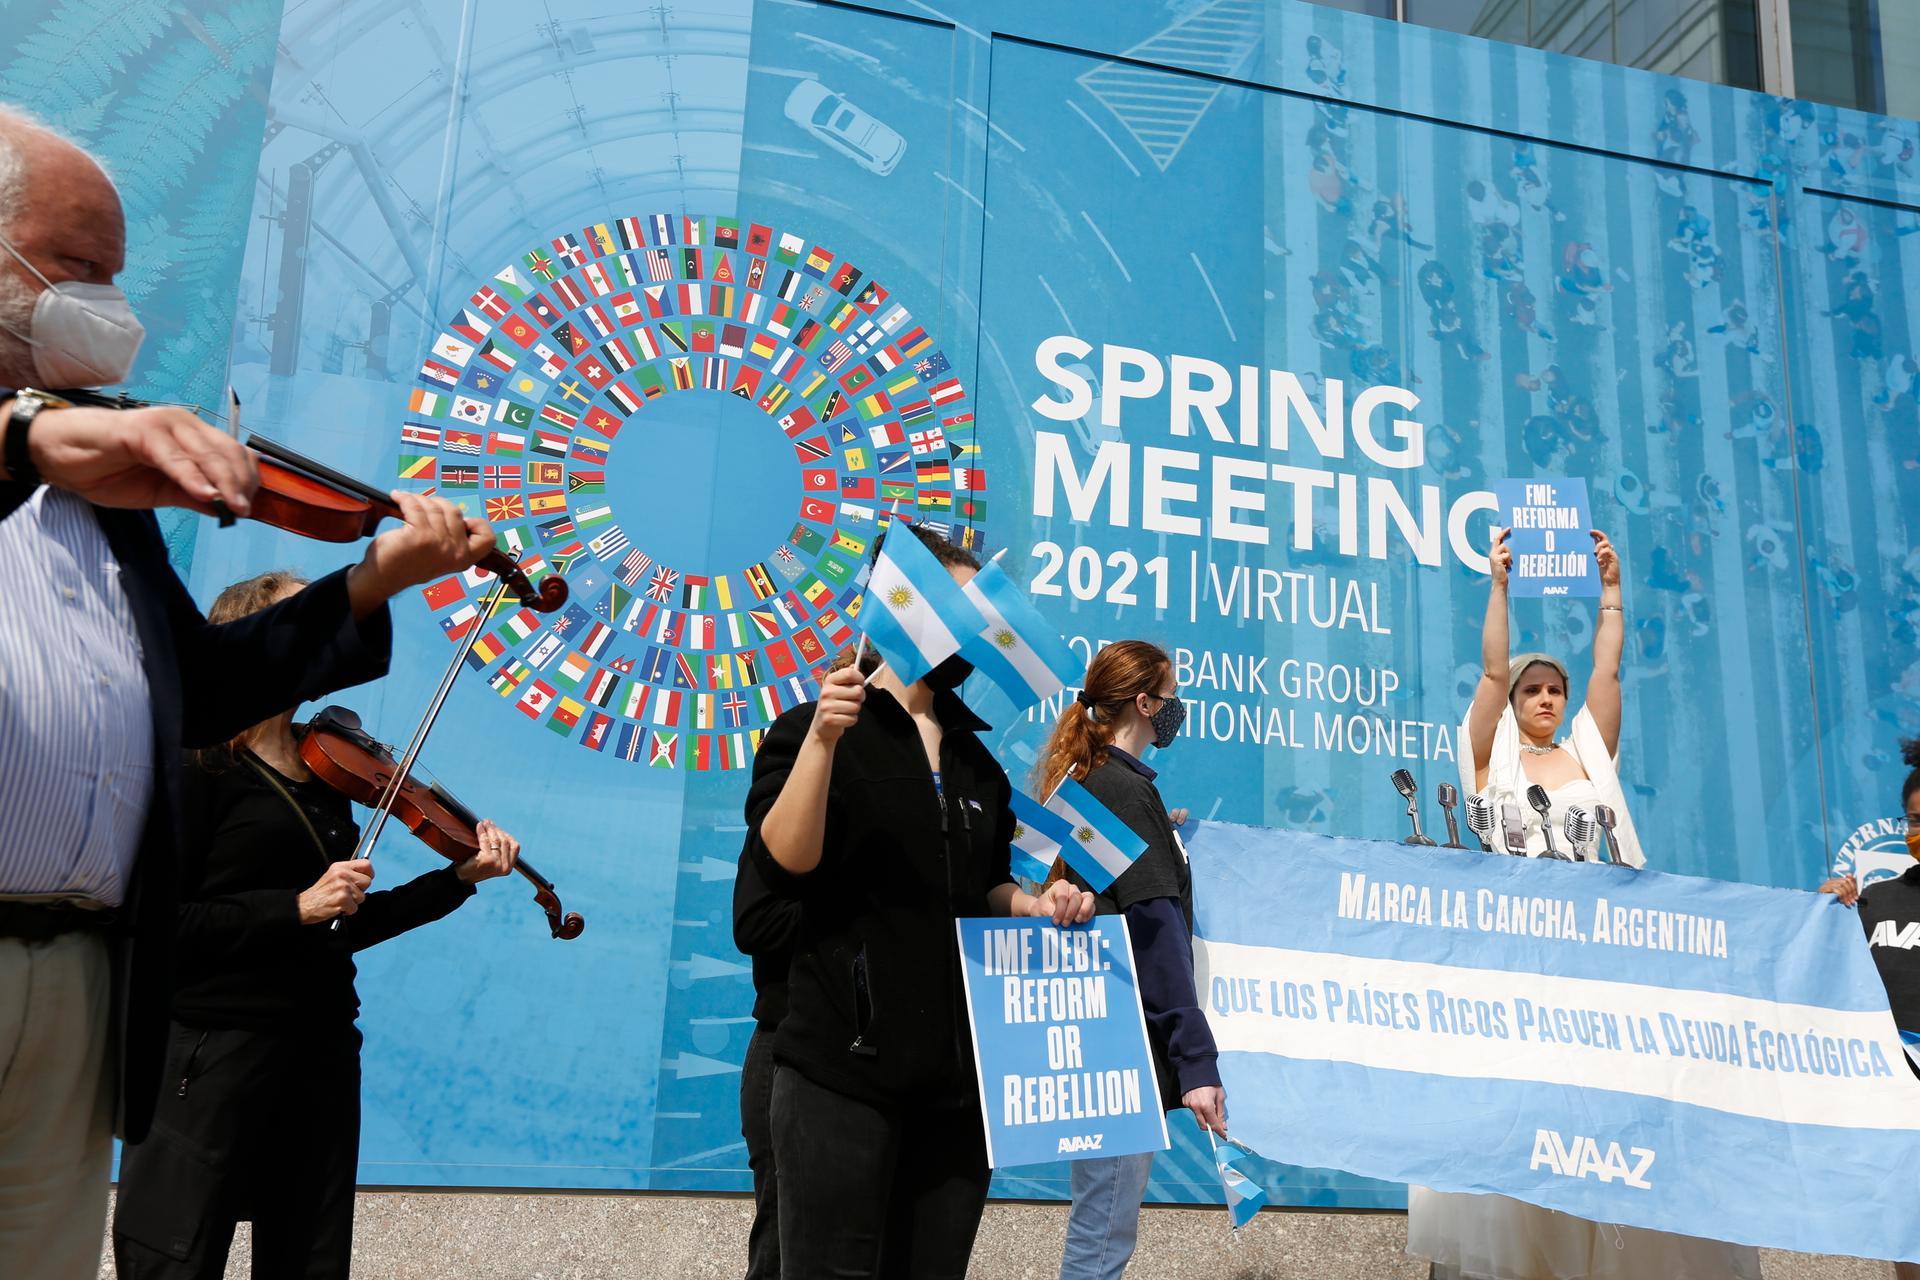 At the entrance of the International Monetary Fund (IMF) Headquarters, an Avaaz.org activist dressed as Eva Peron — also known as Evita — sings 